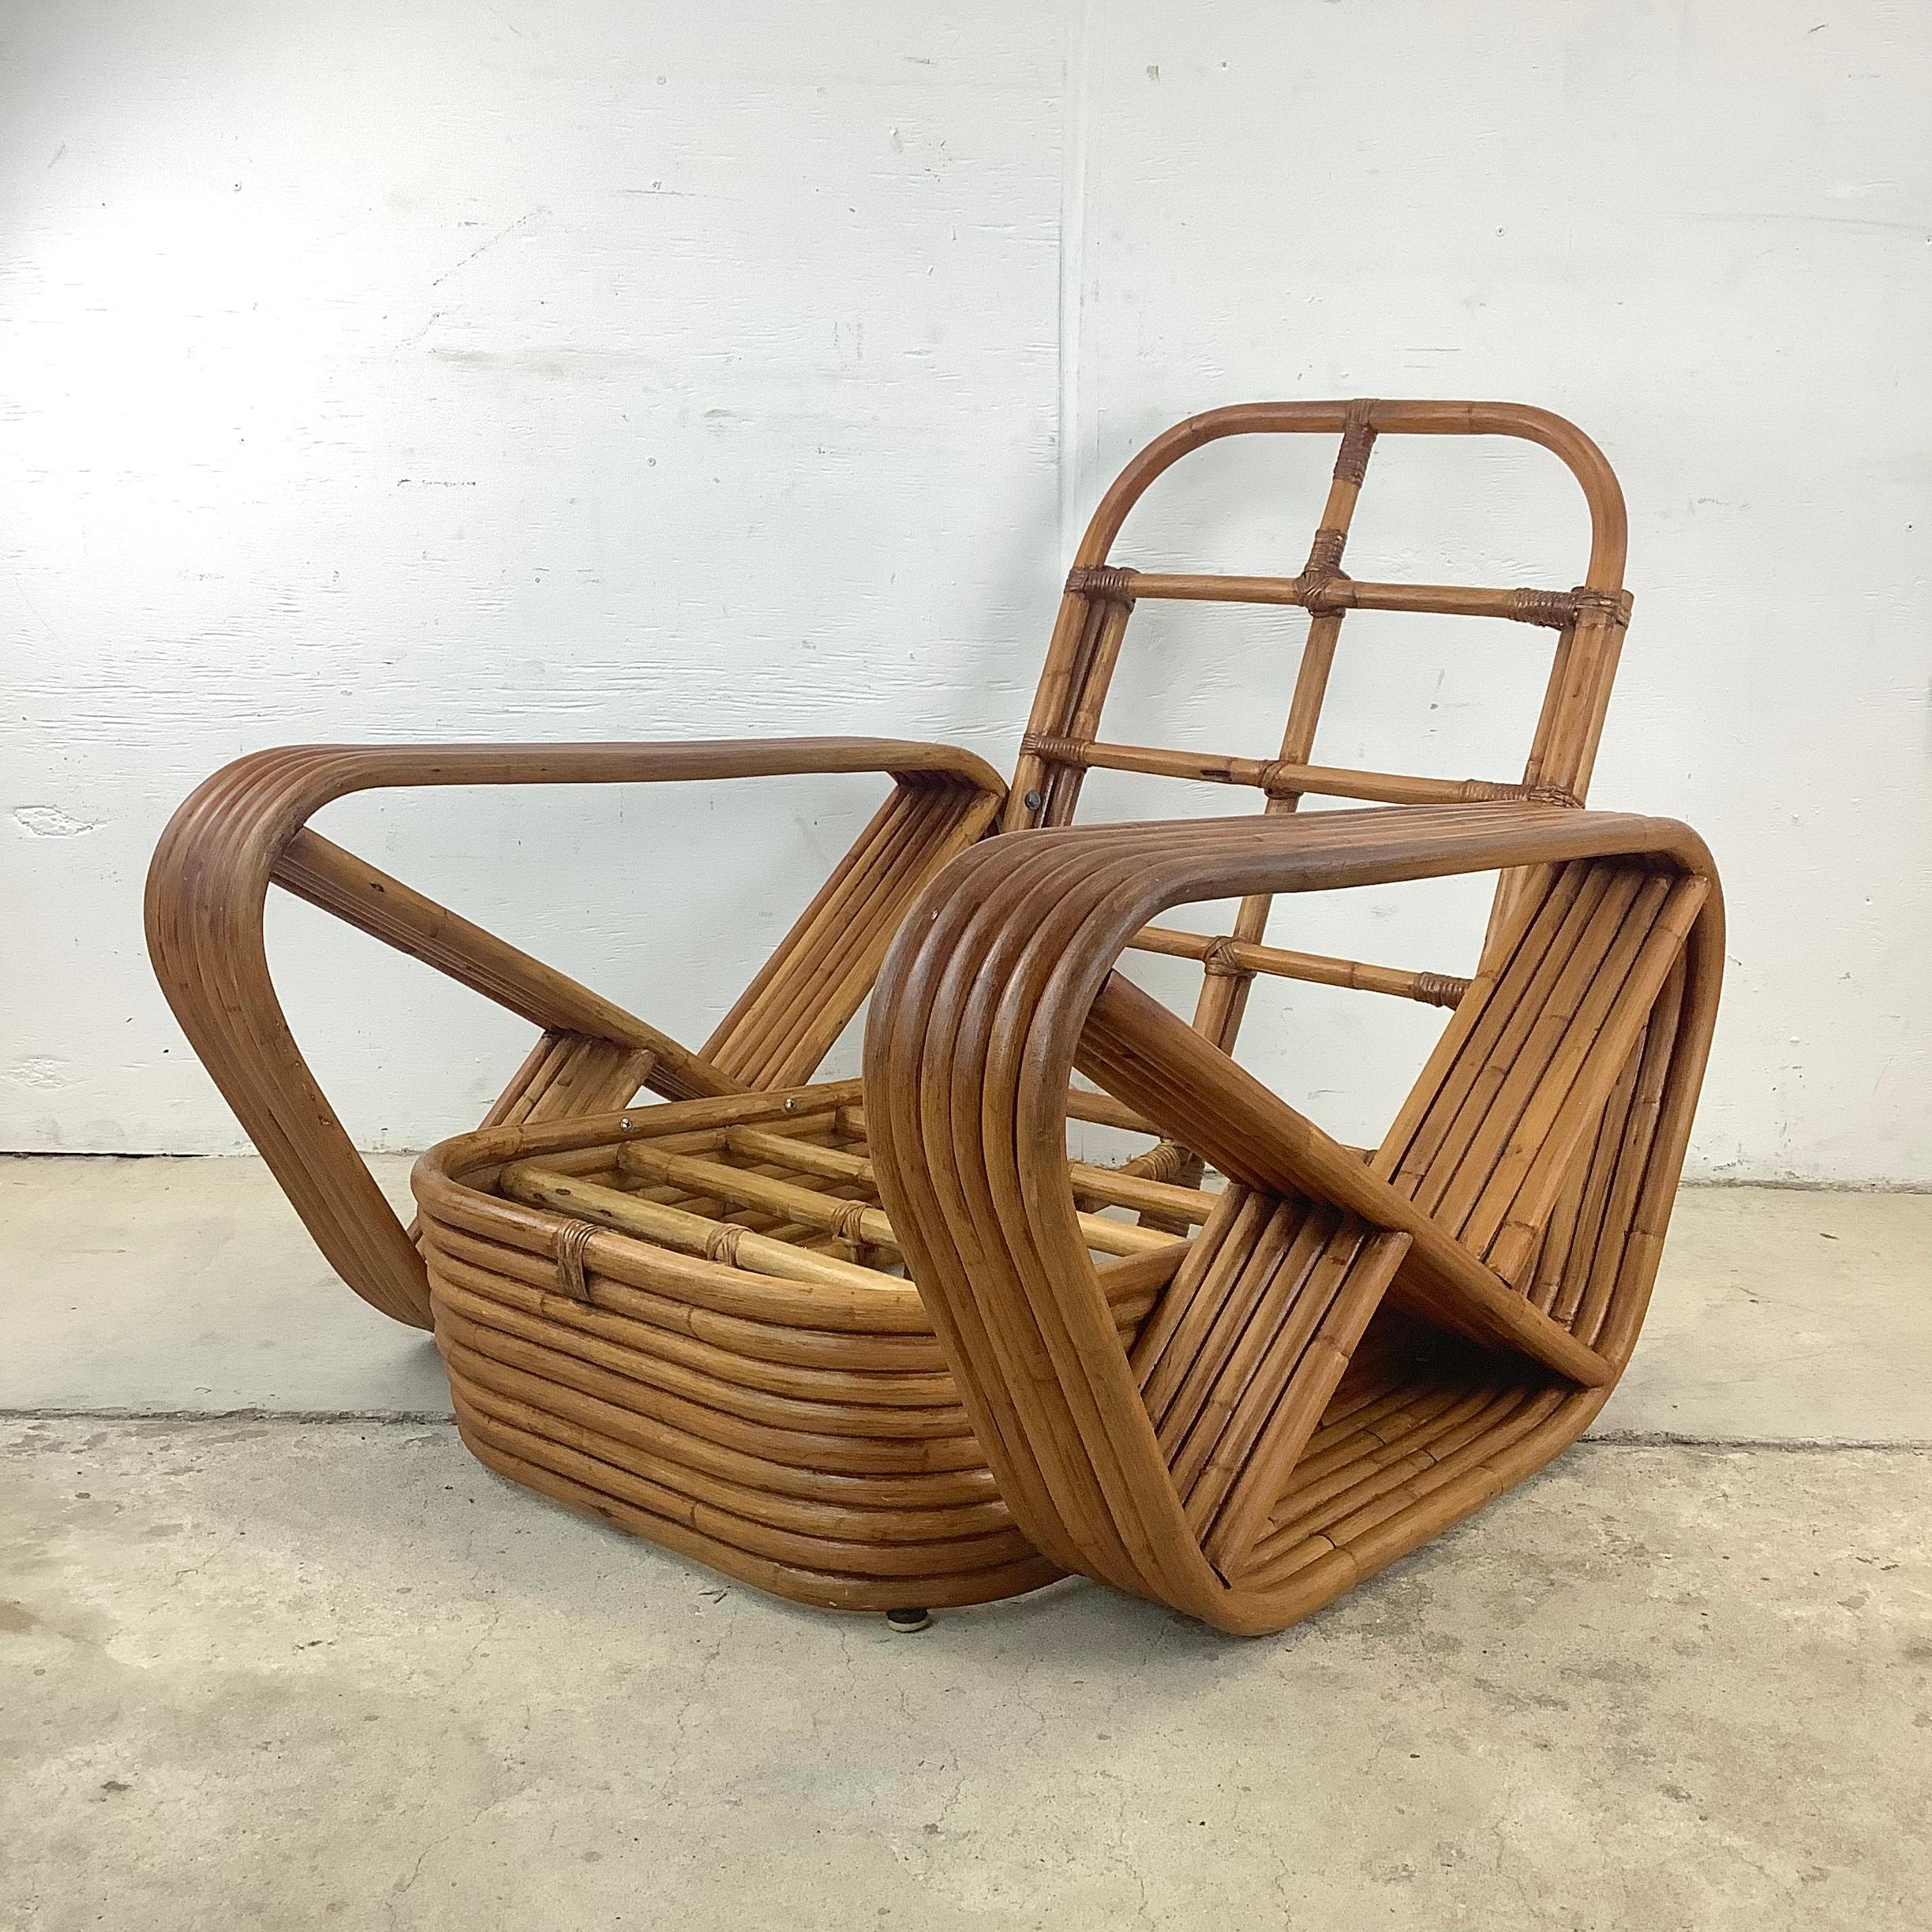 Step into a world of boho charm with this Paul Frankl Style Bamboo Pretzel frame Armchair, a quality example of vintage craftsmanship with a touch of Tropical flair. Crafted with the utmost care and attention to detail, this vintage armchair boasts